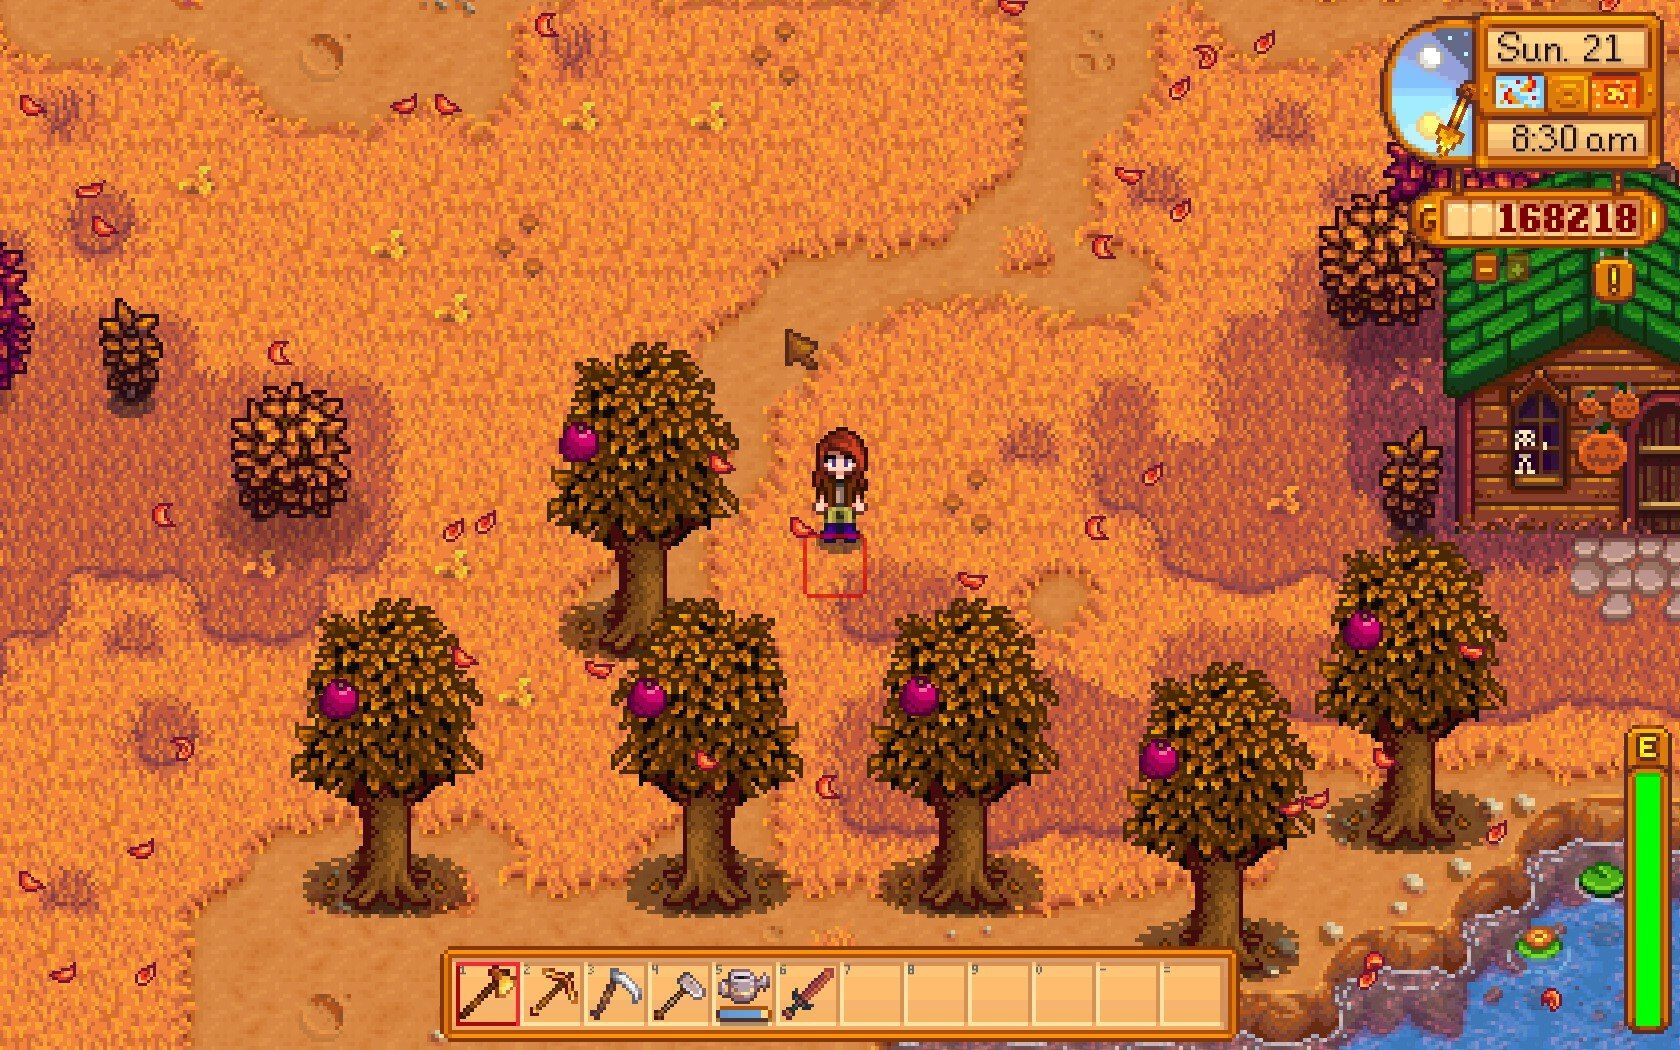 stardew valley player standing near pomegranate trees